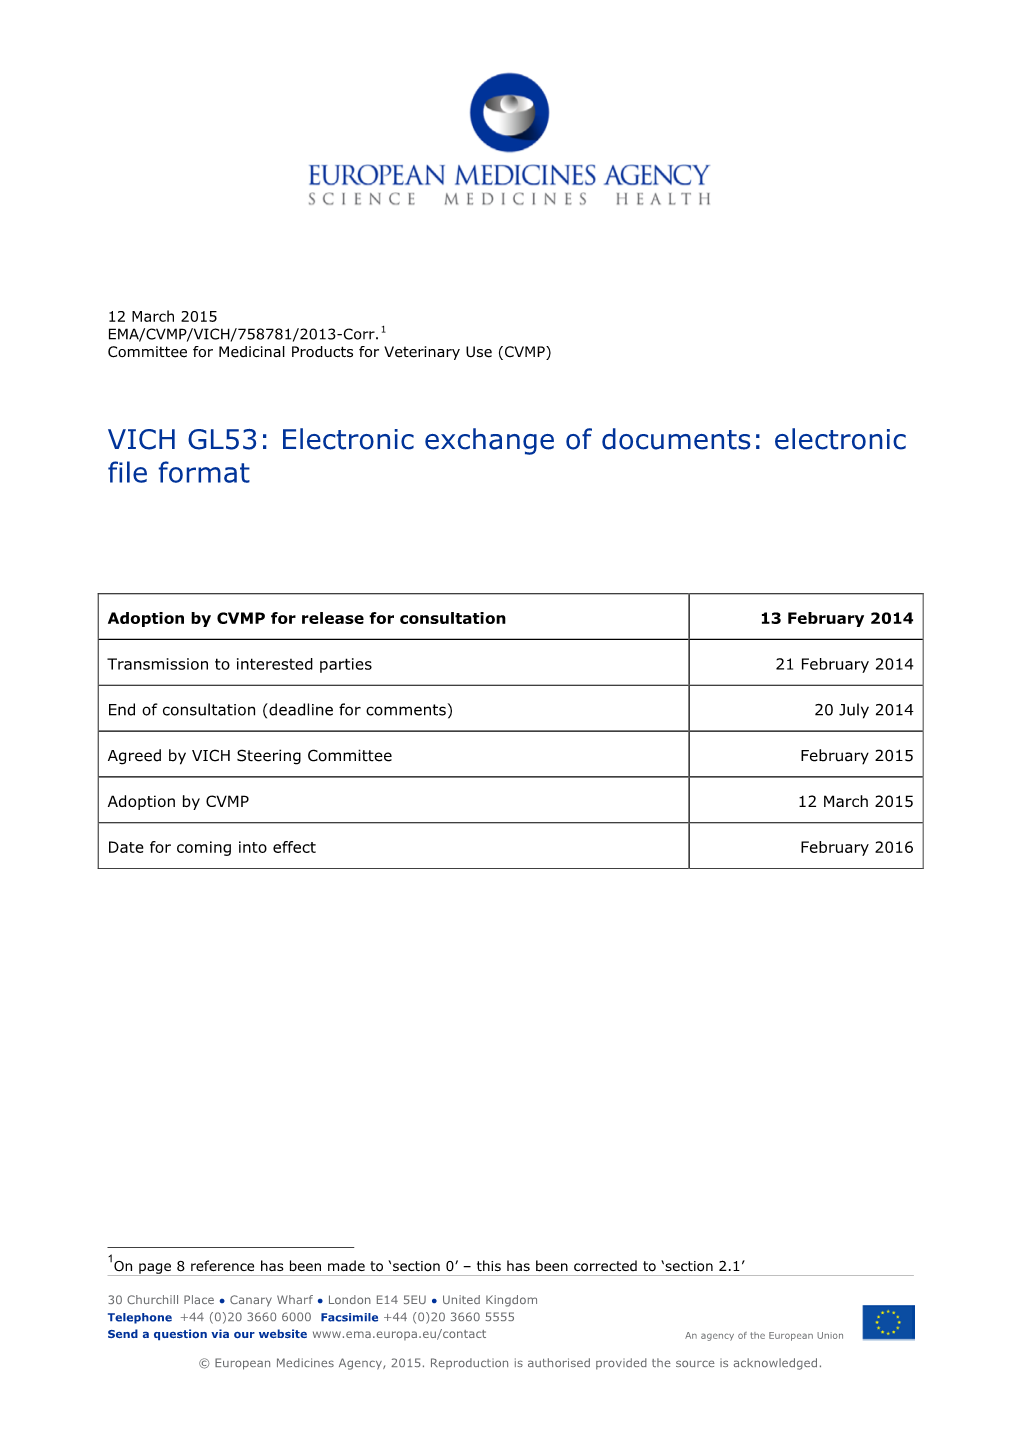 Electronic File Format